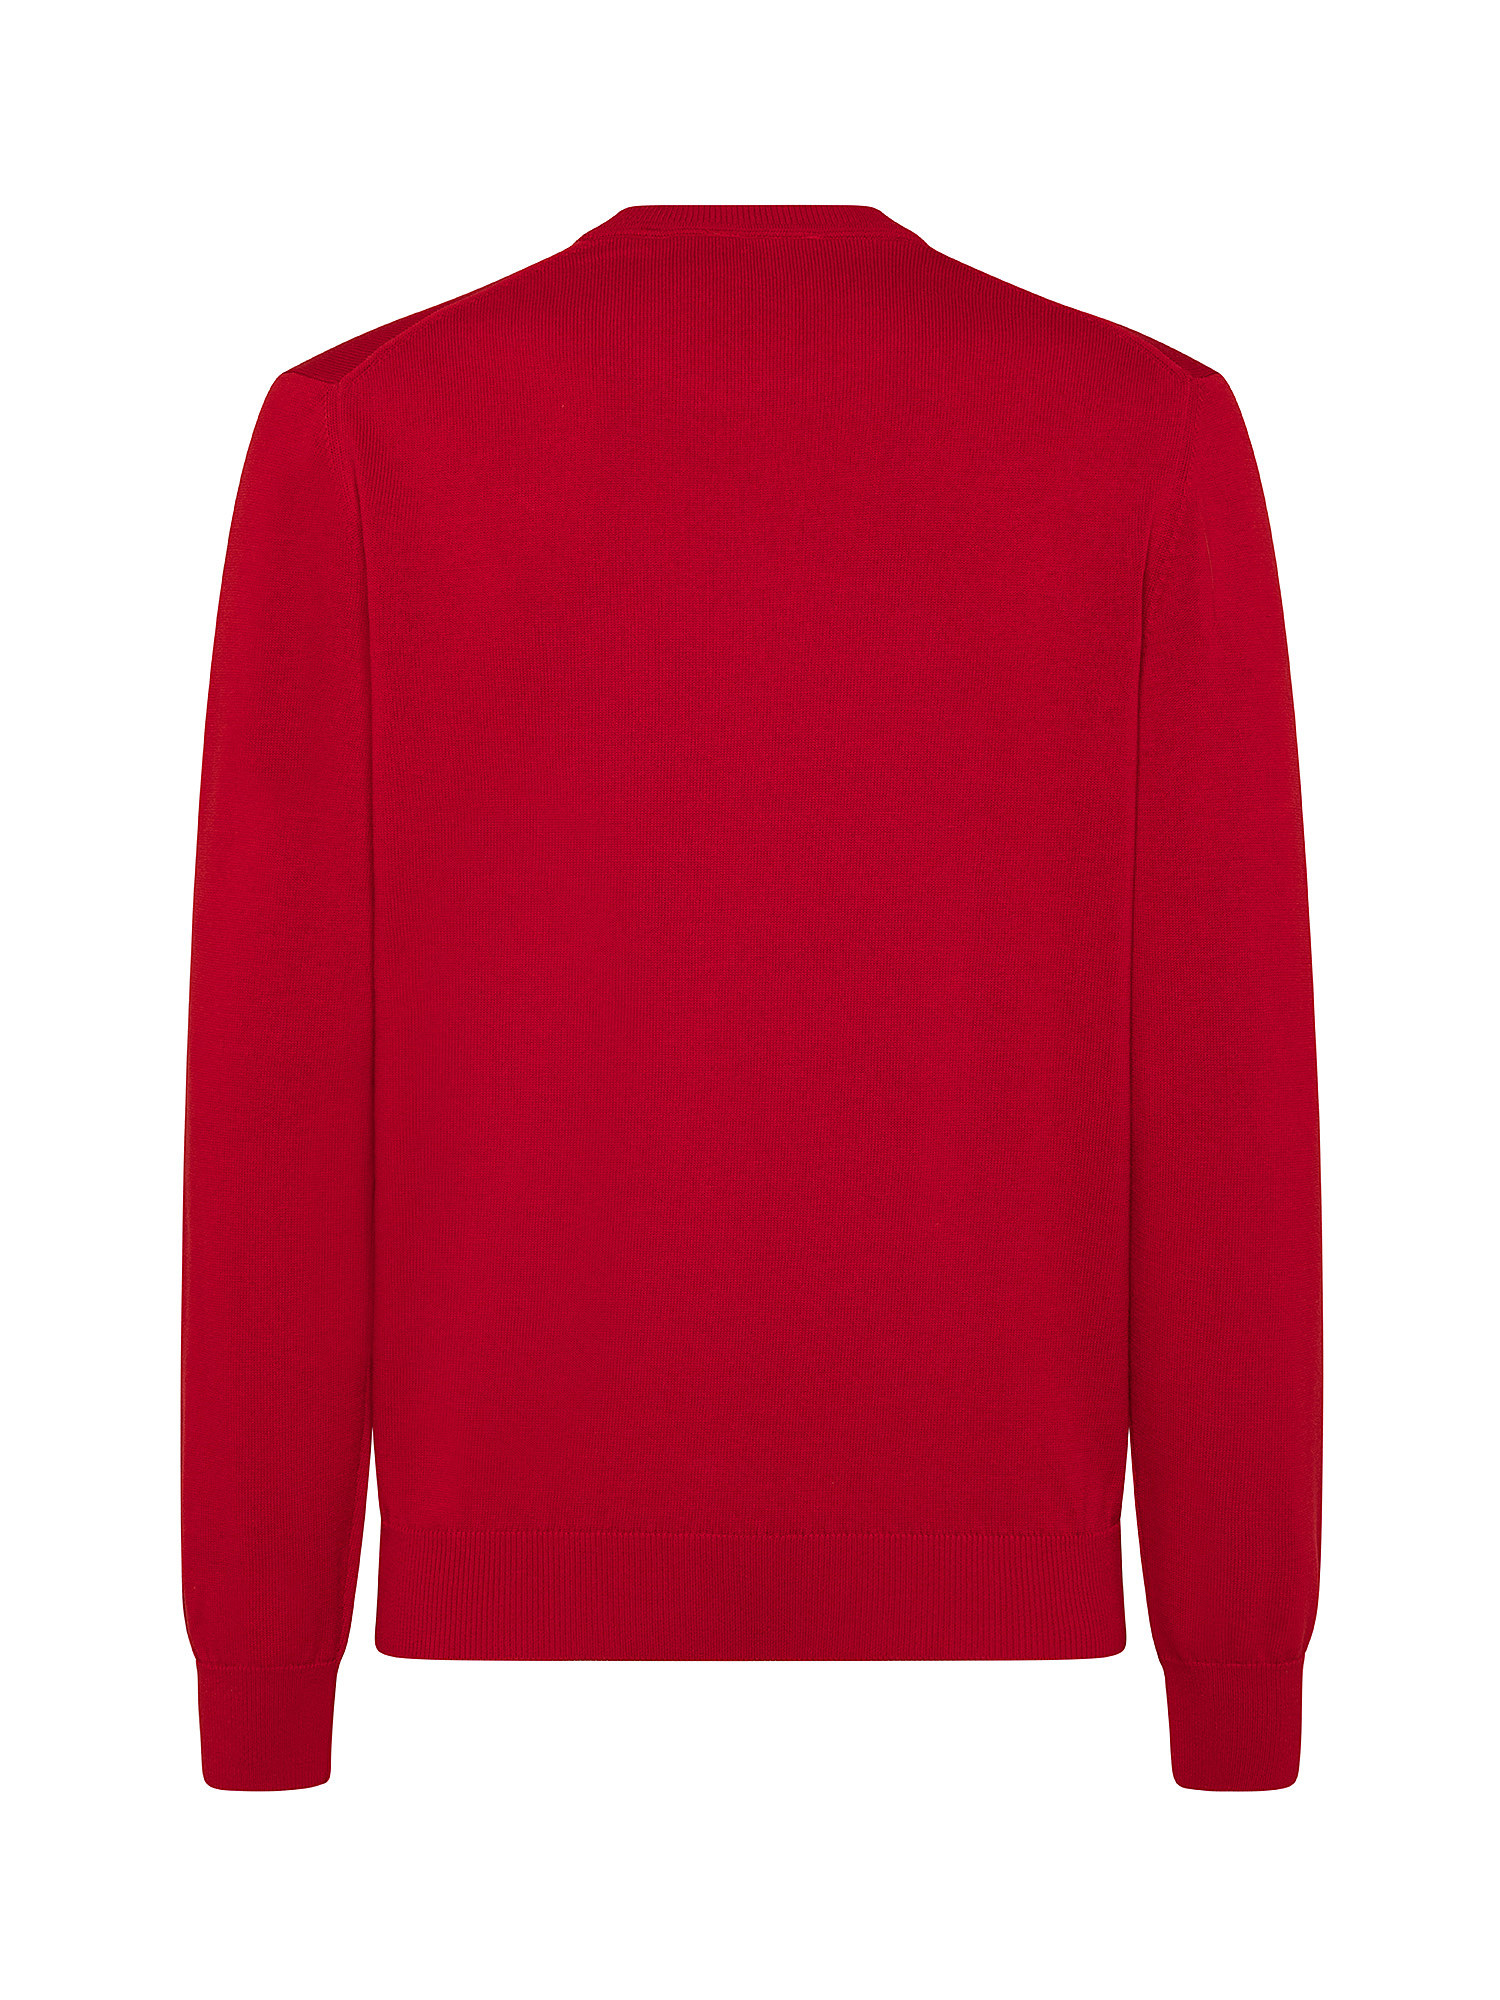 Pullover, Rosso, large